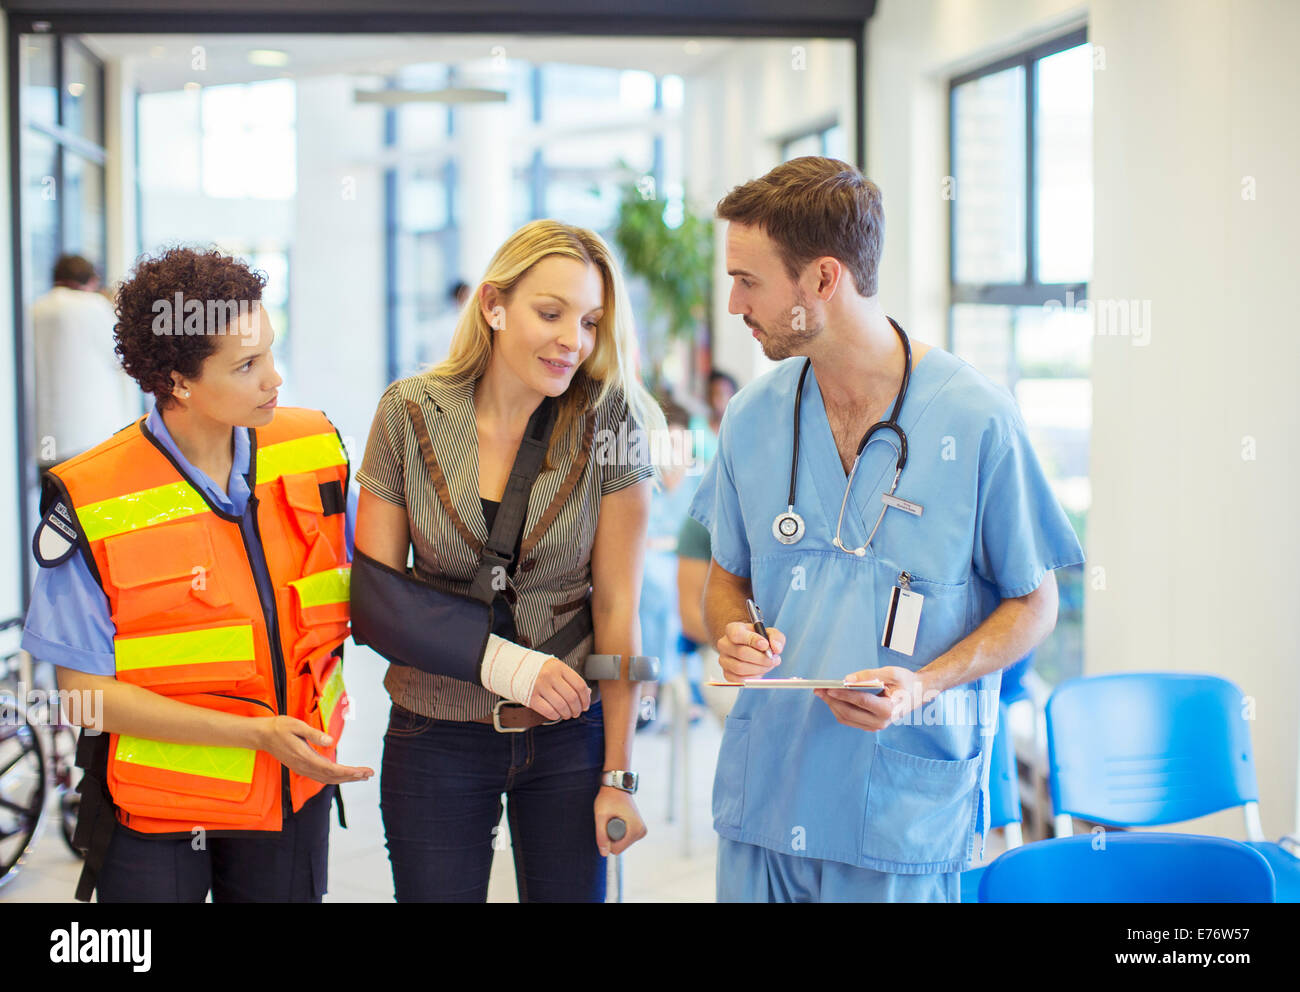 Nurse and paramedic talking to patient in hospital Stock Photo